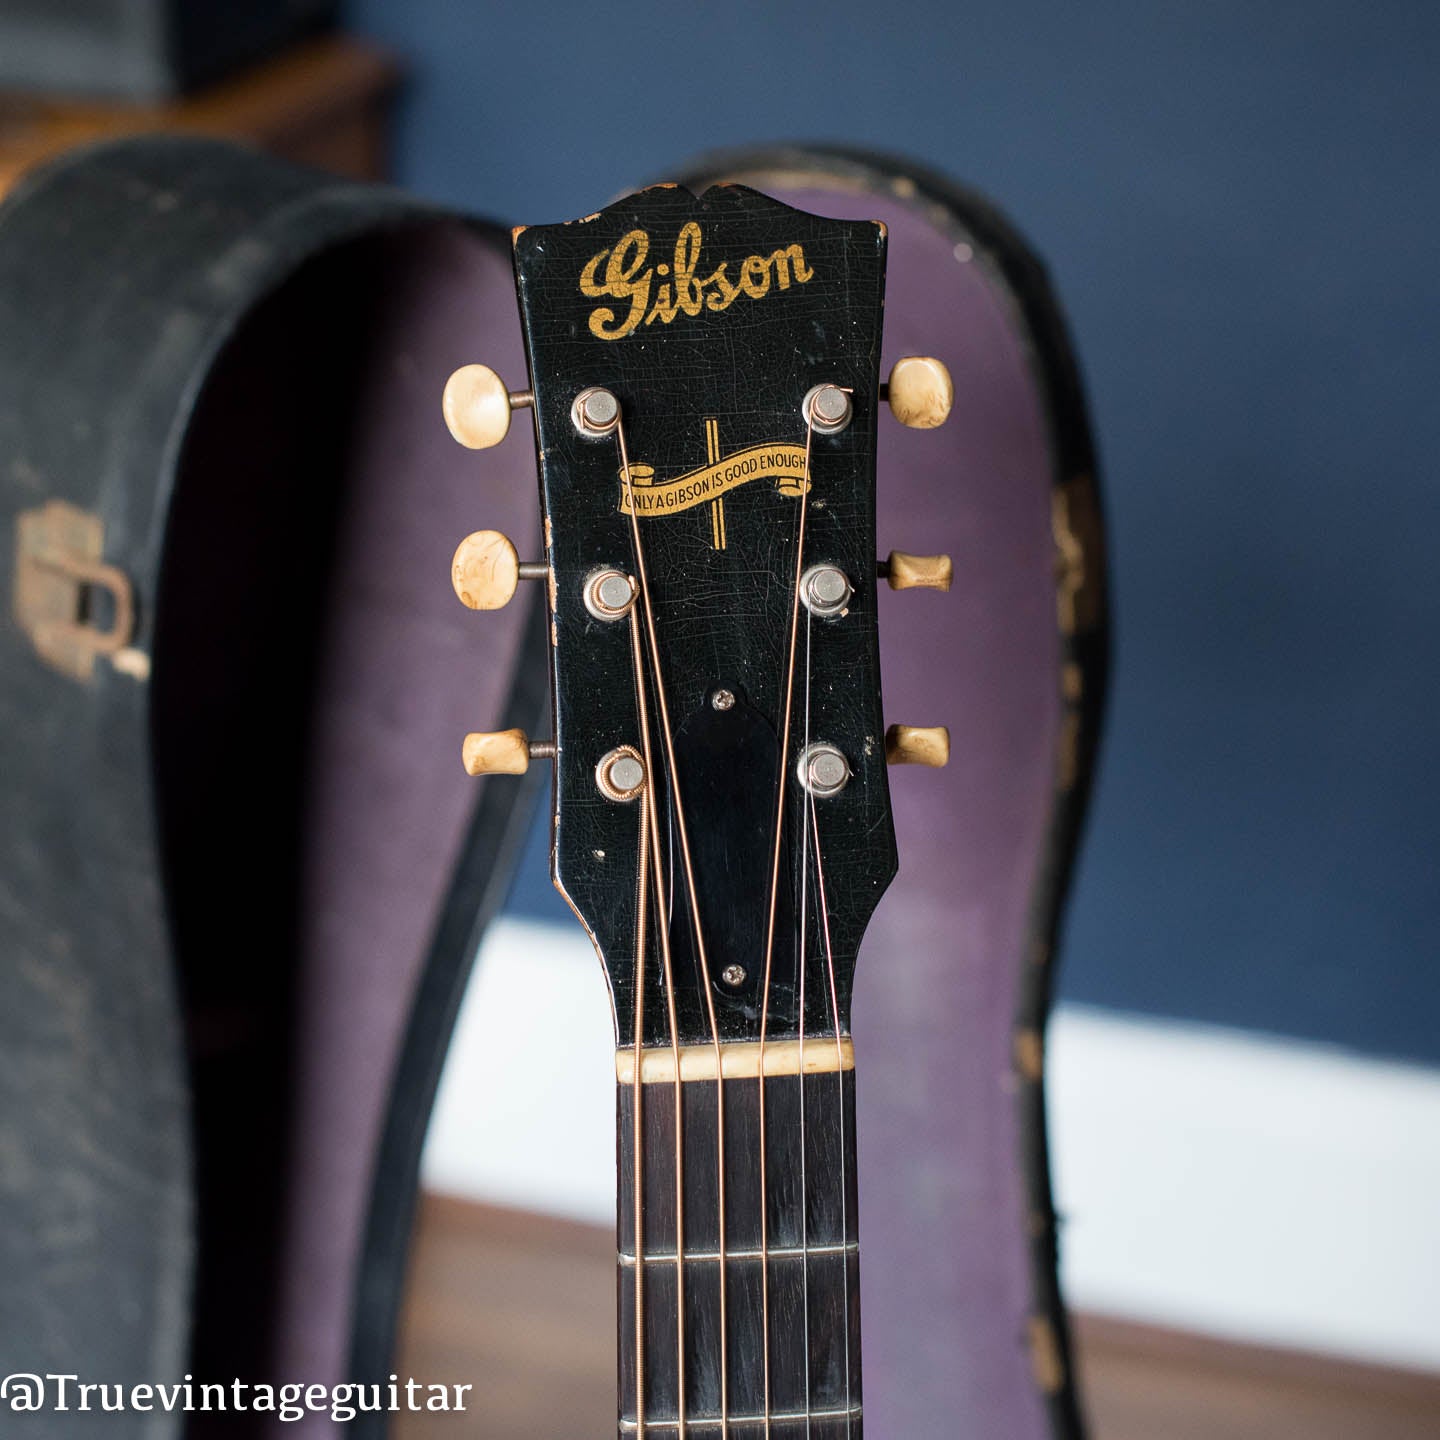 Vintage Gibson guitar with Only A Gibson Is Good Enough headstock